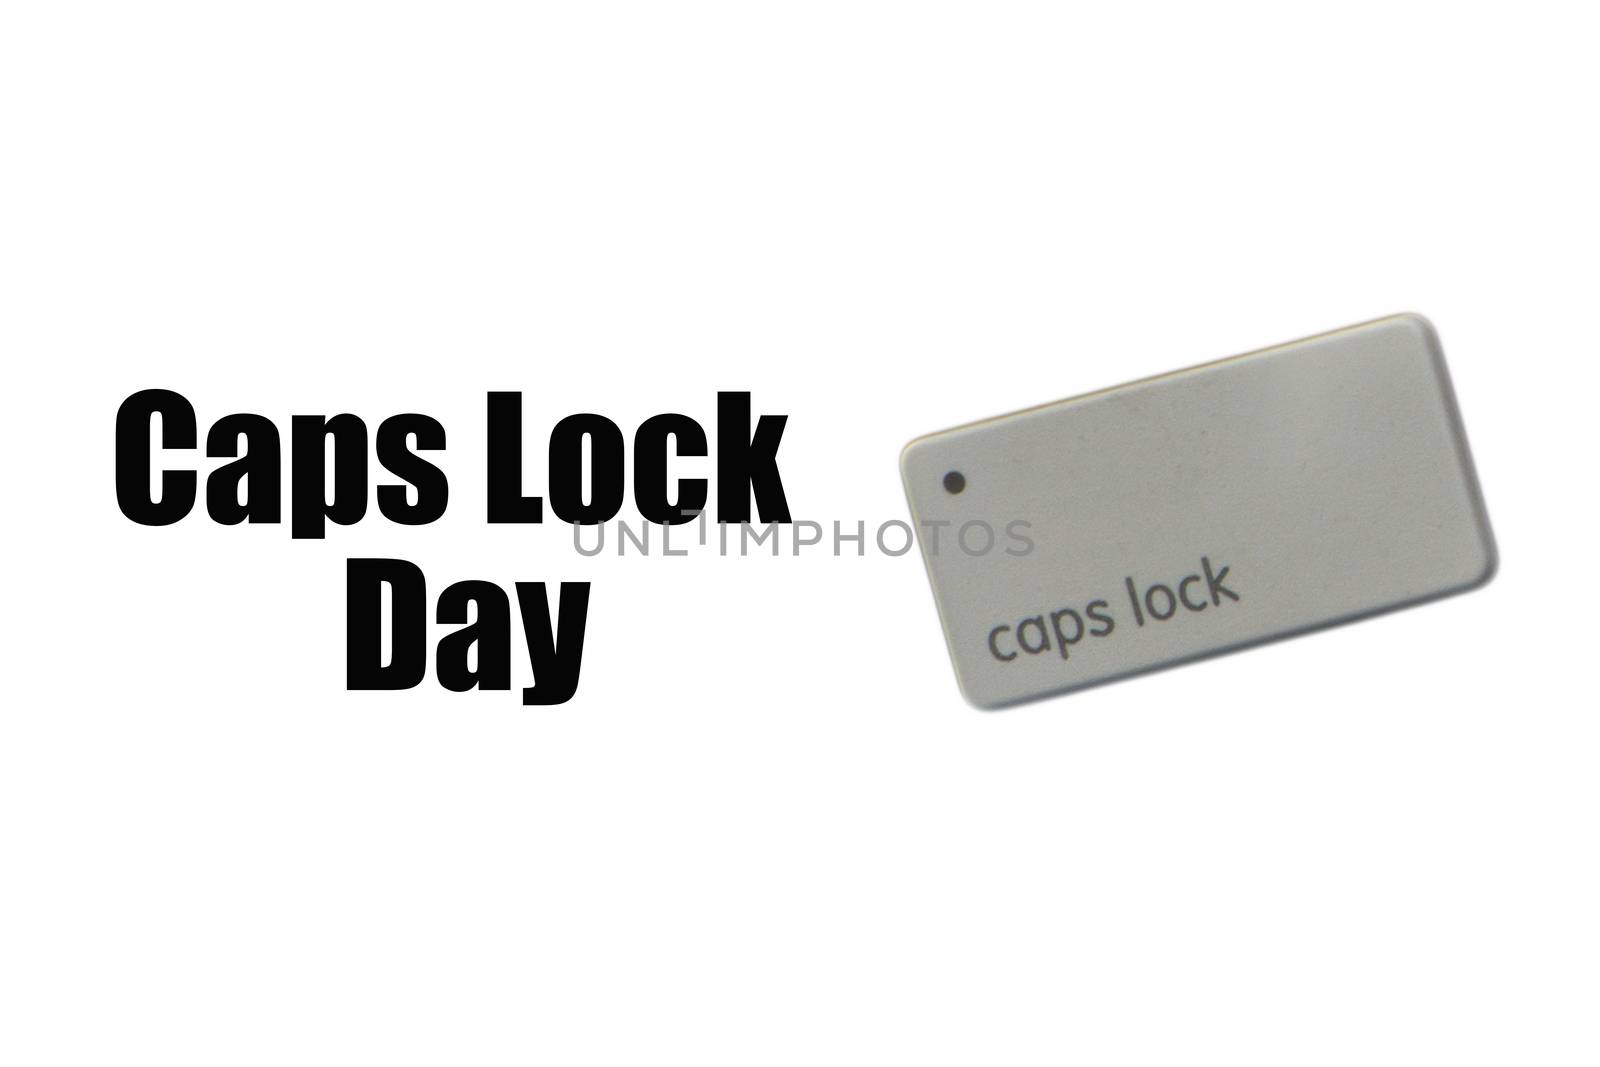 CAPS LOCK DAY text and computer keyboard on white background by silverwings